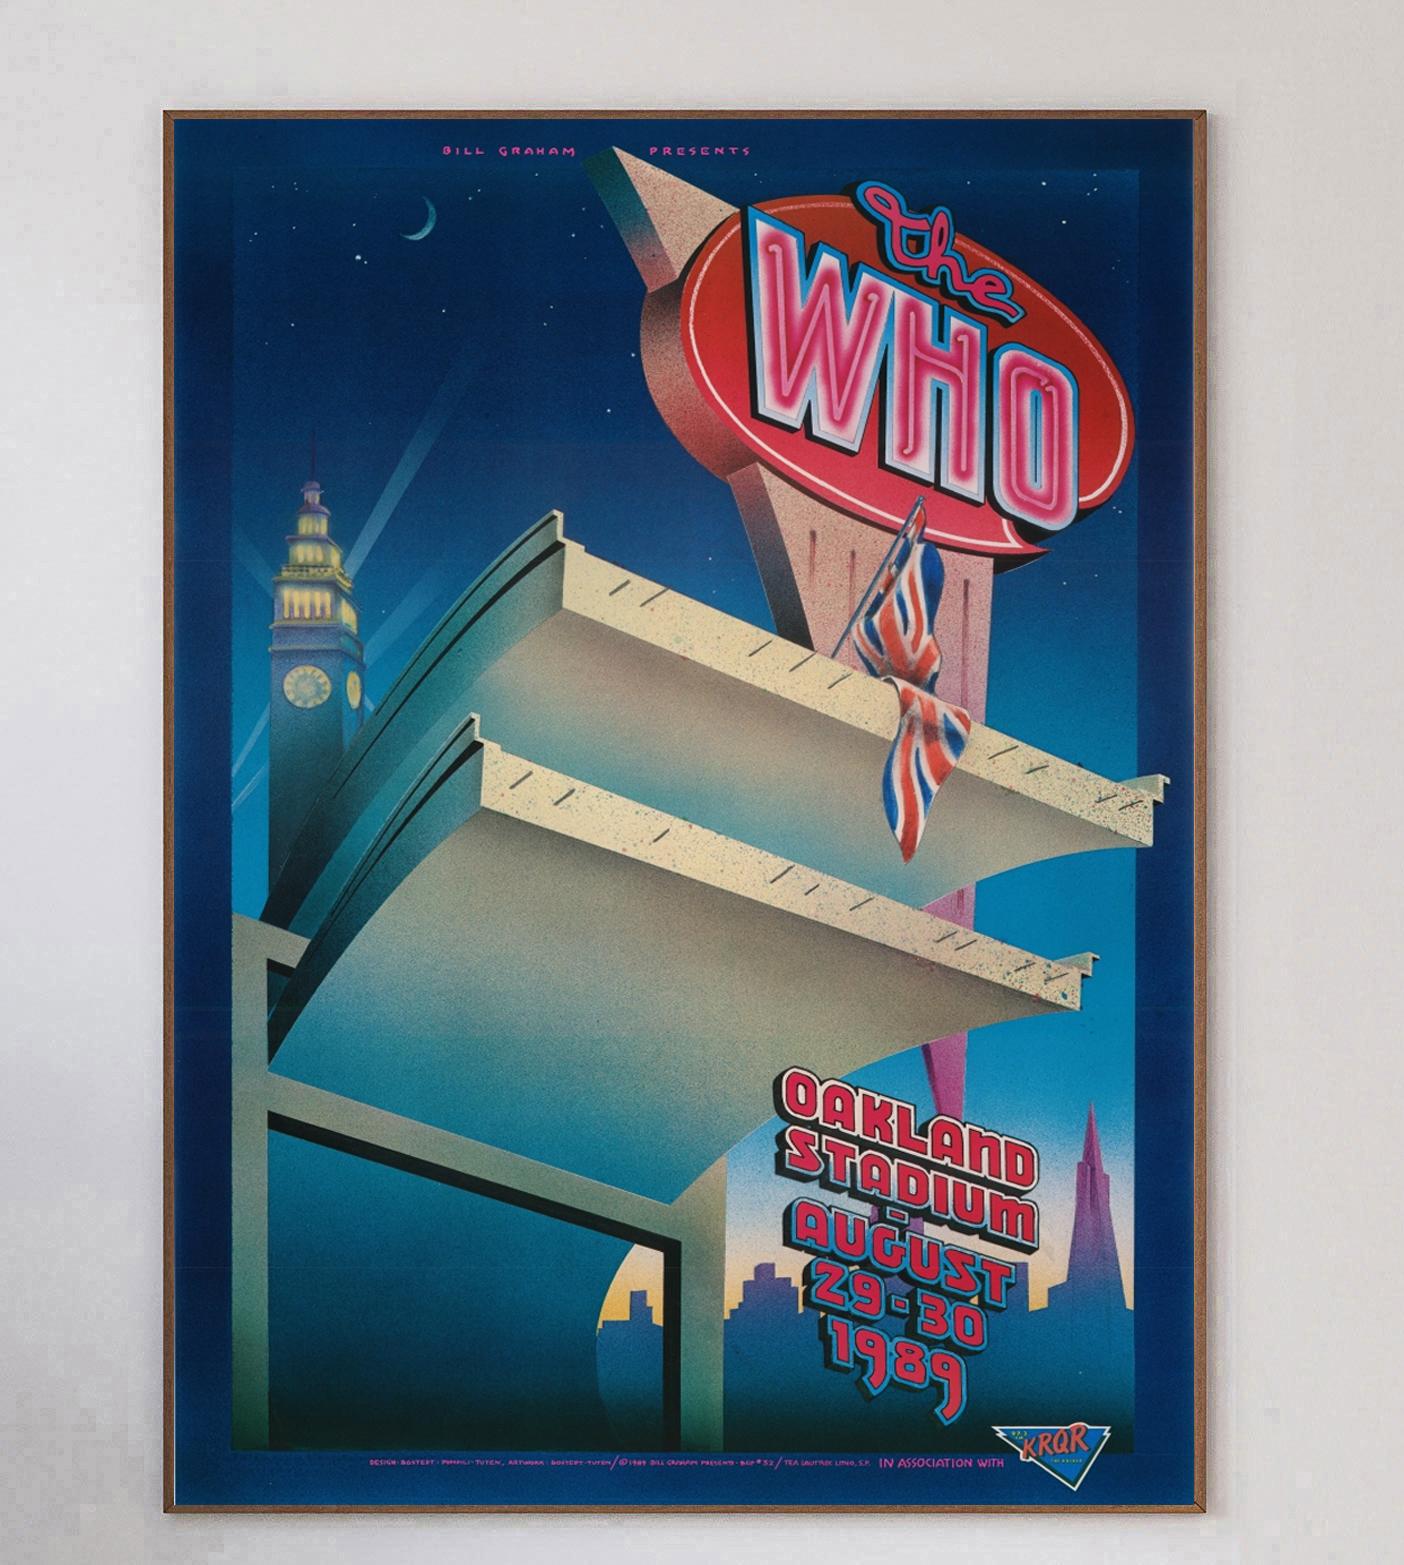 Designed by the great concert poster artist Randy Tuten, along with William Bostedt and Jerry Pompili, this beautiful poster was created in 1989 to promote a live concert of The The Who at the Oakland Stadium in California. Bill Graham events such